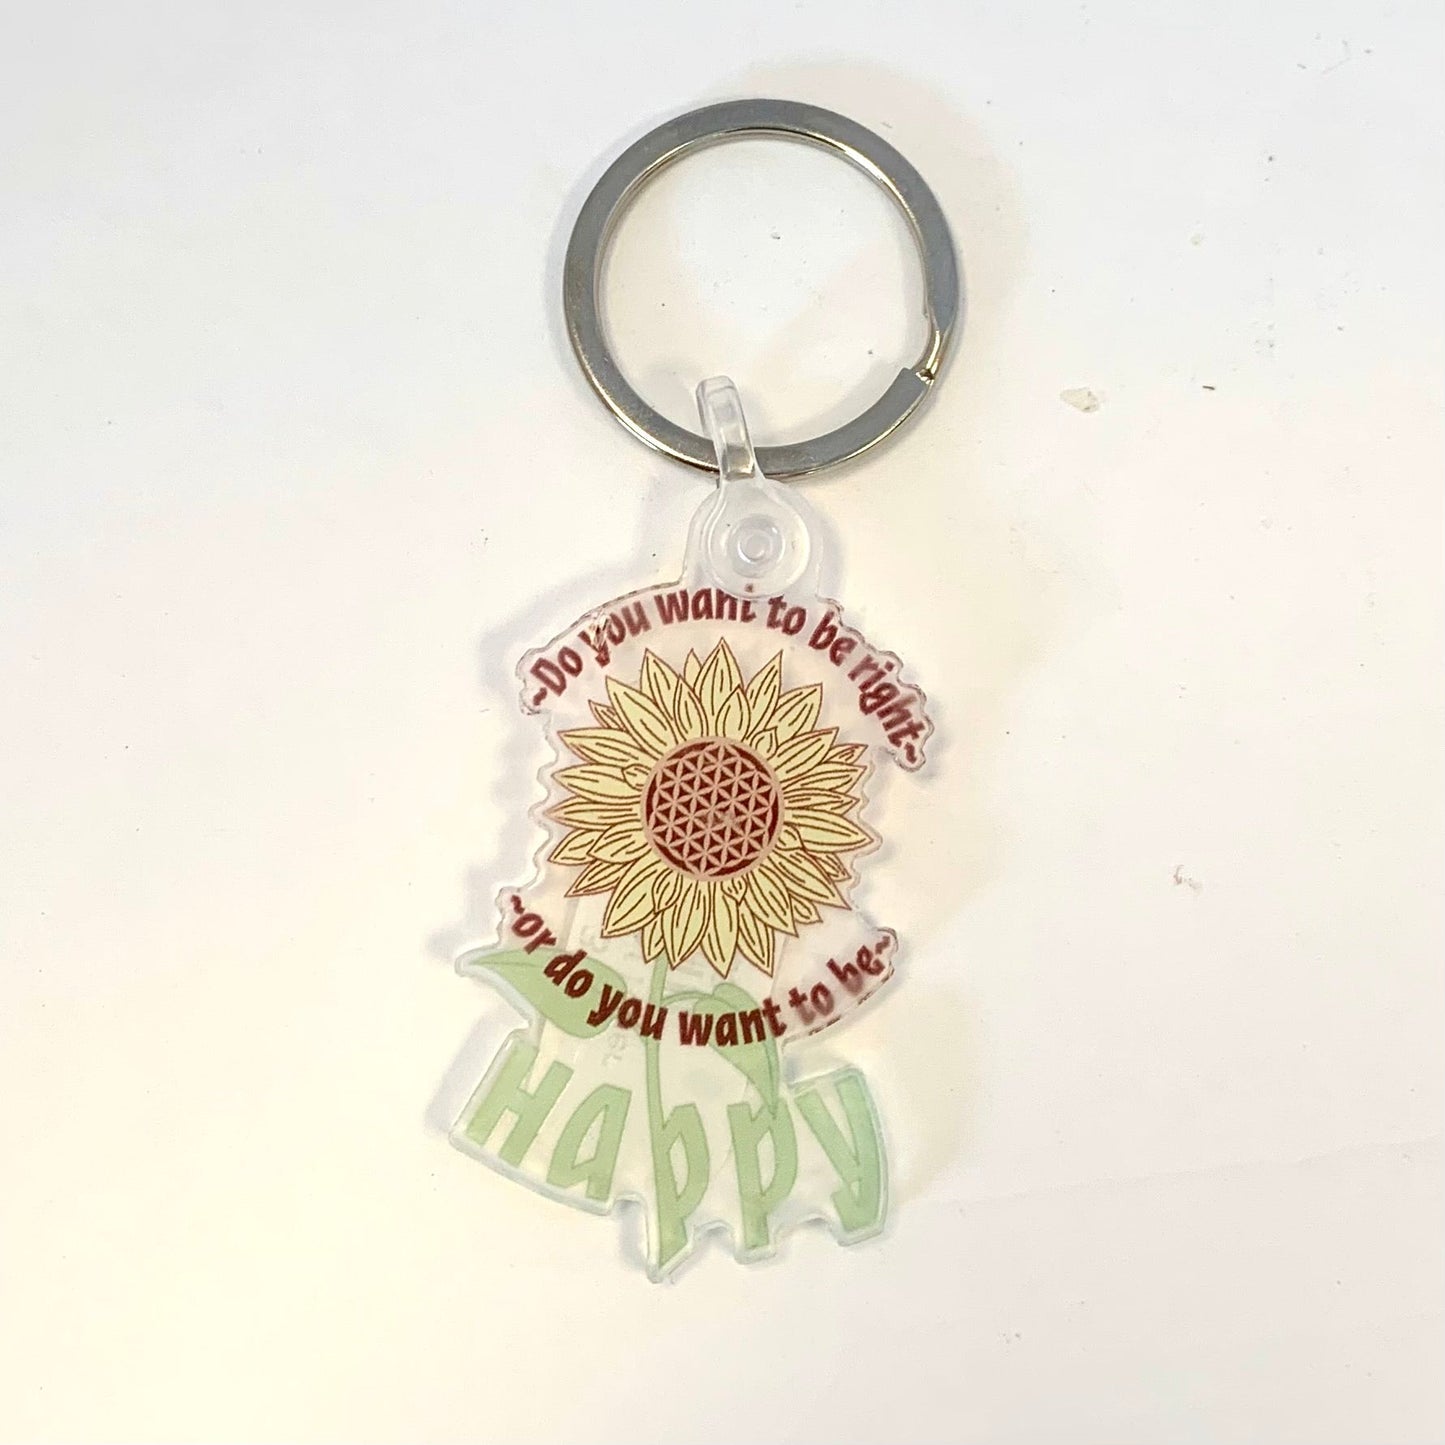 Do you want to be right or do you want to be happy keychain - Pluff Mud Mercantile